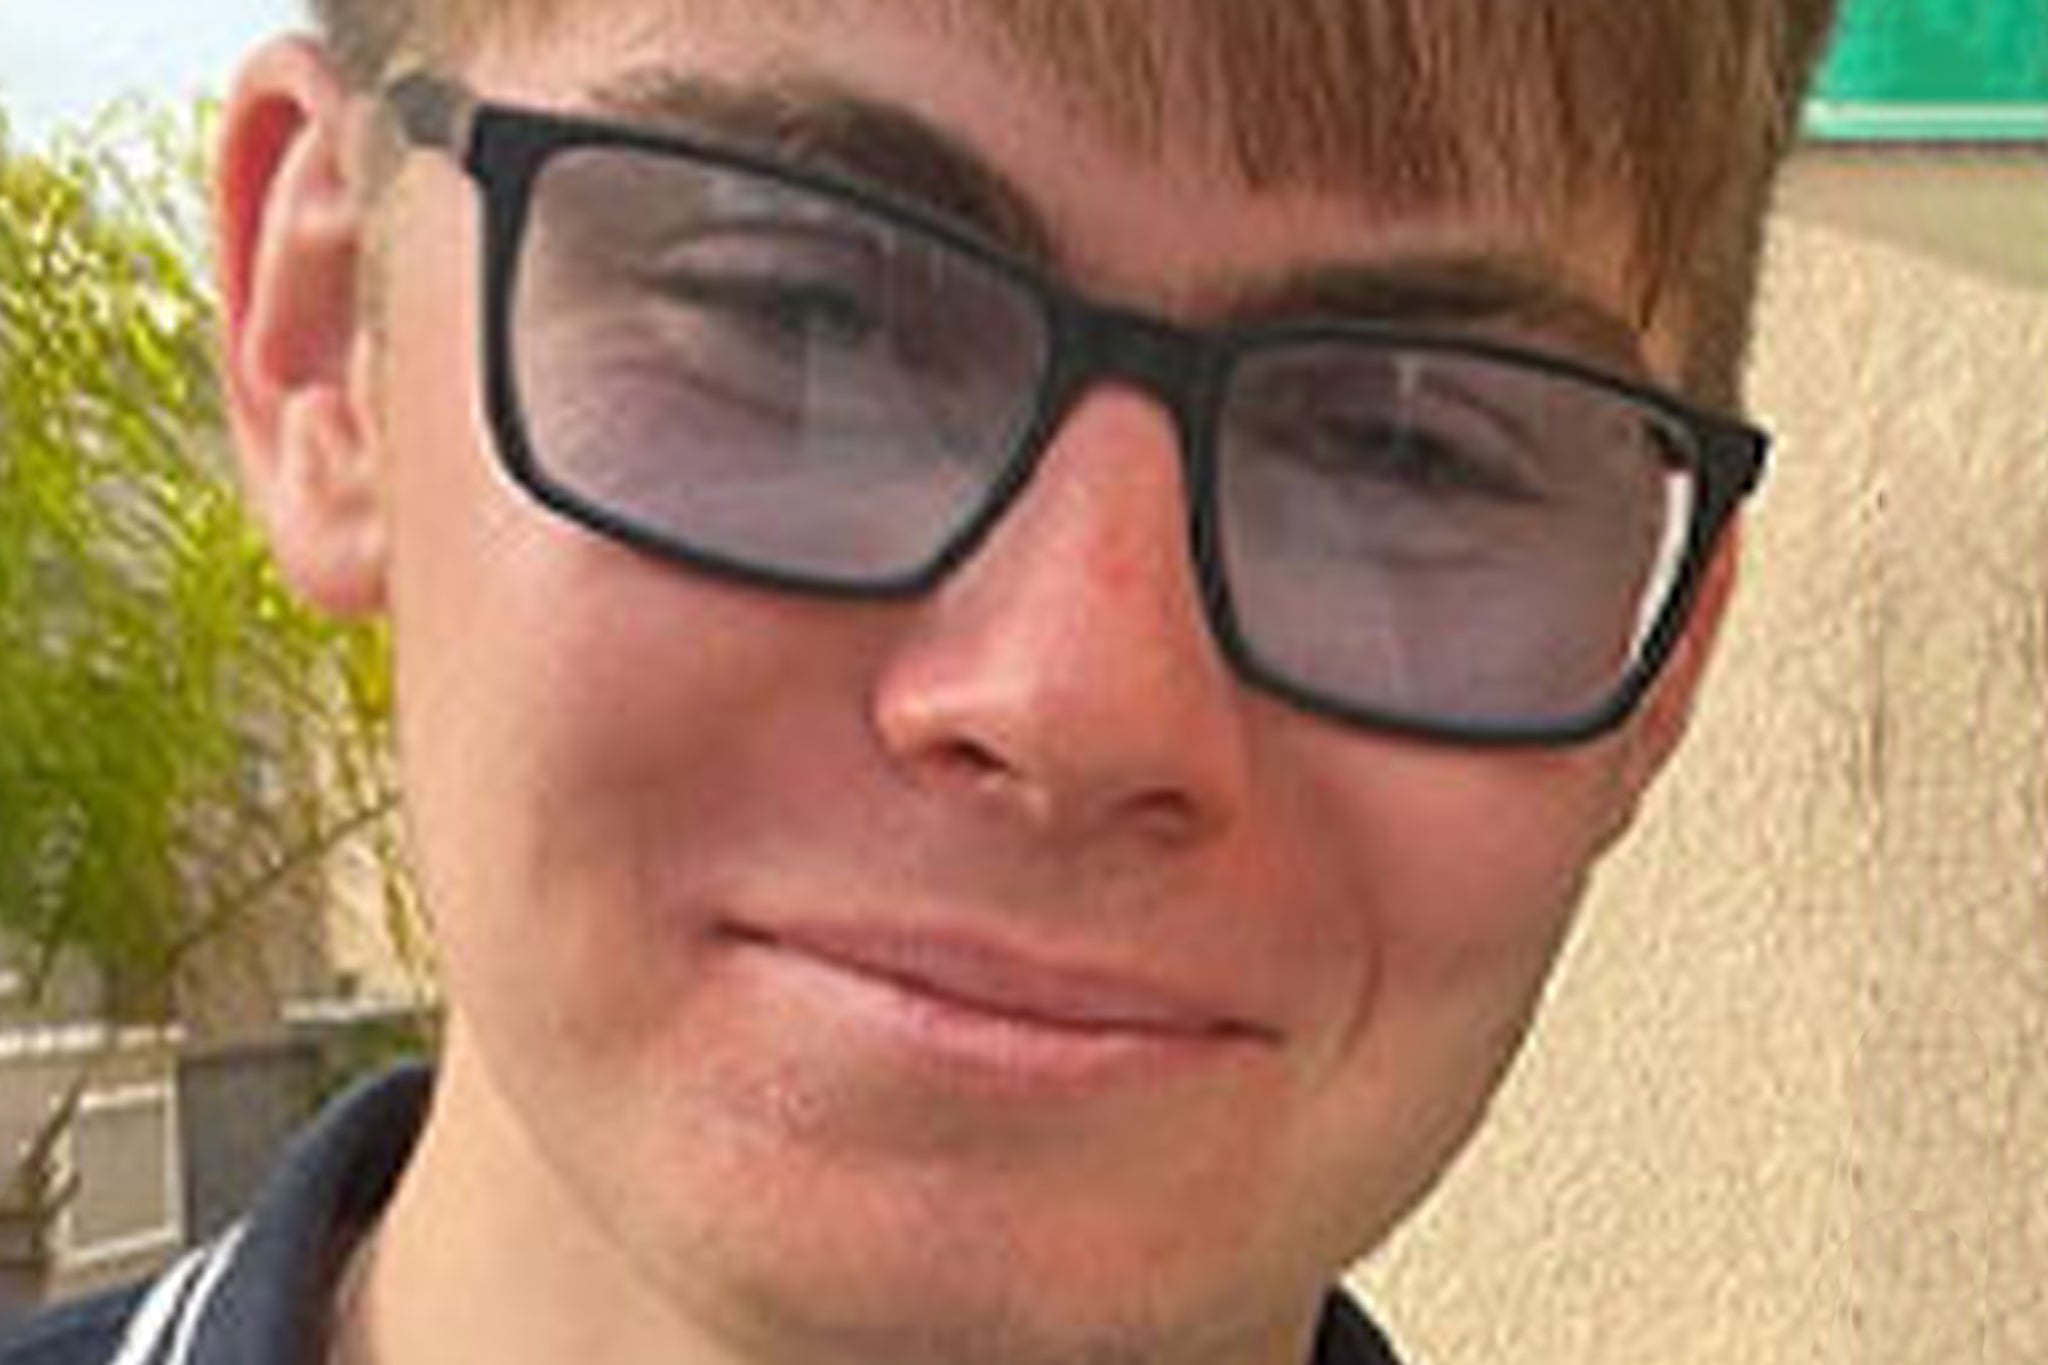 Jacob Crompton was last seen in Retford town centre in March